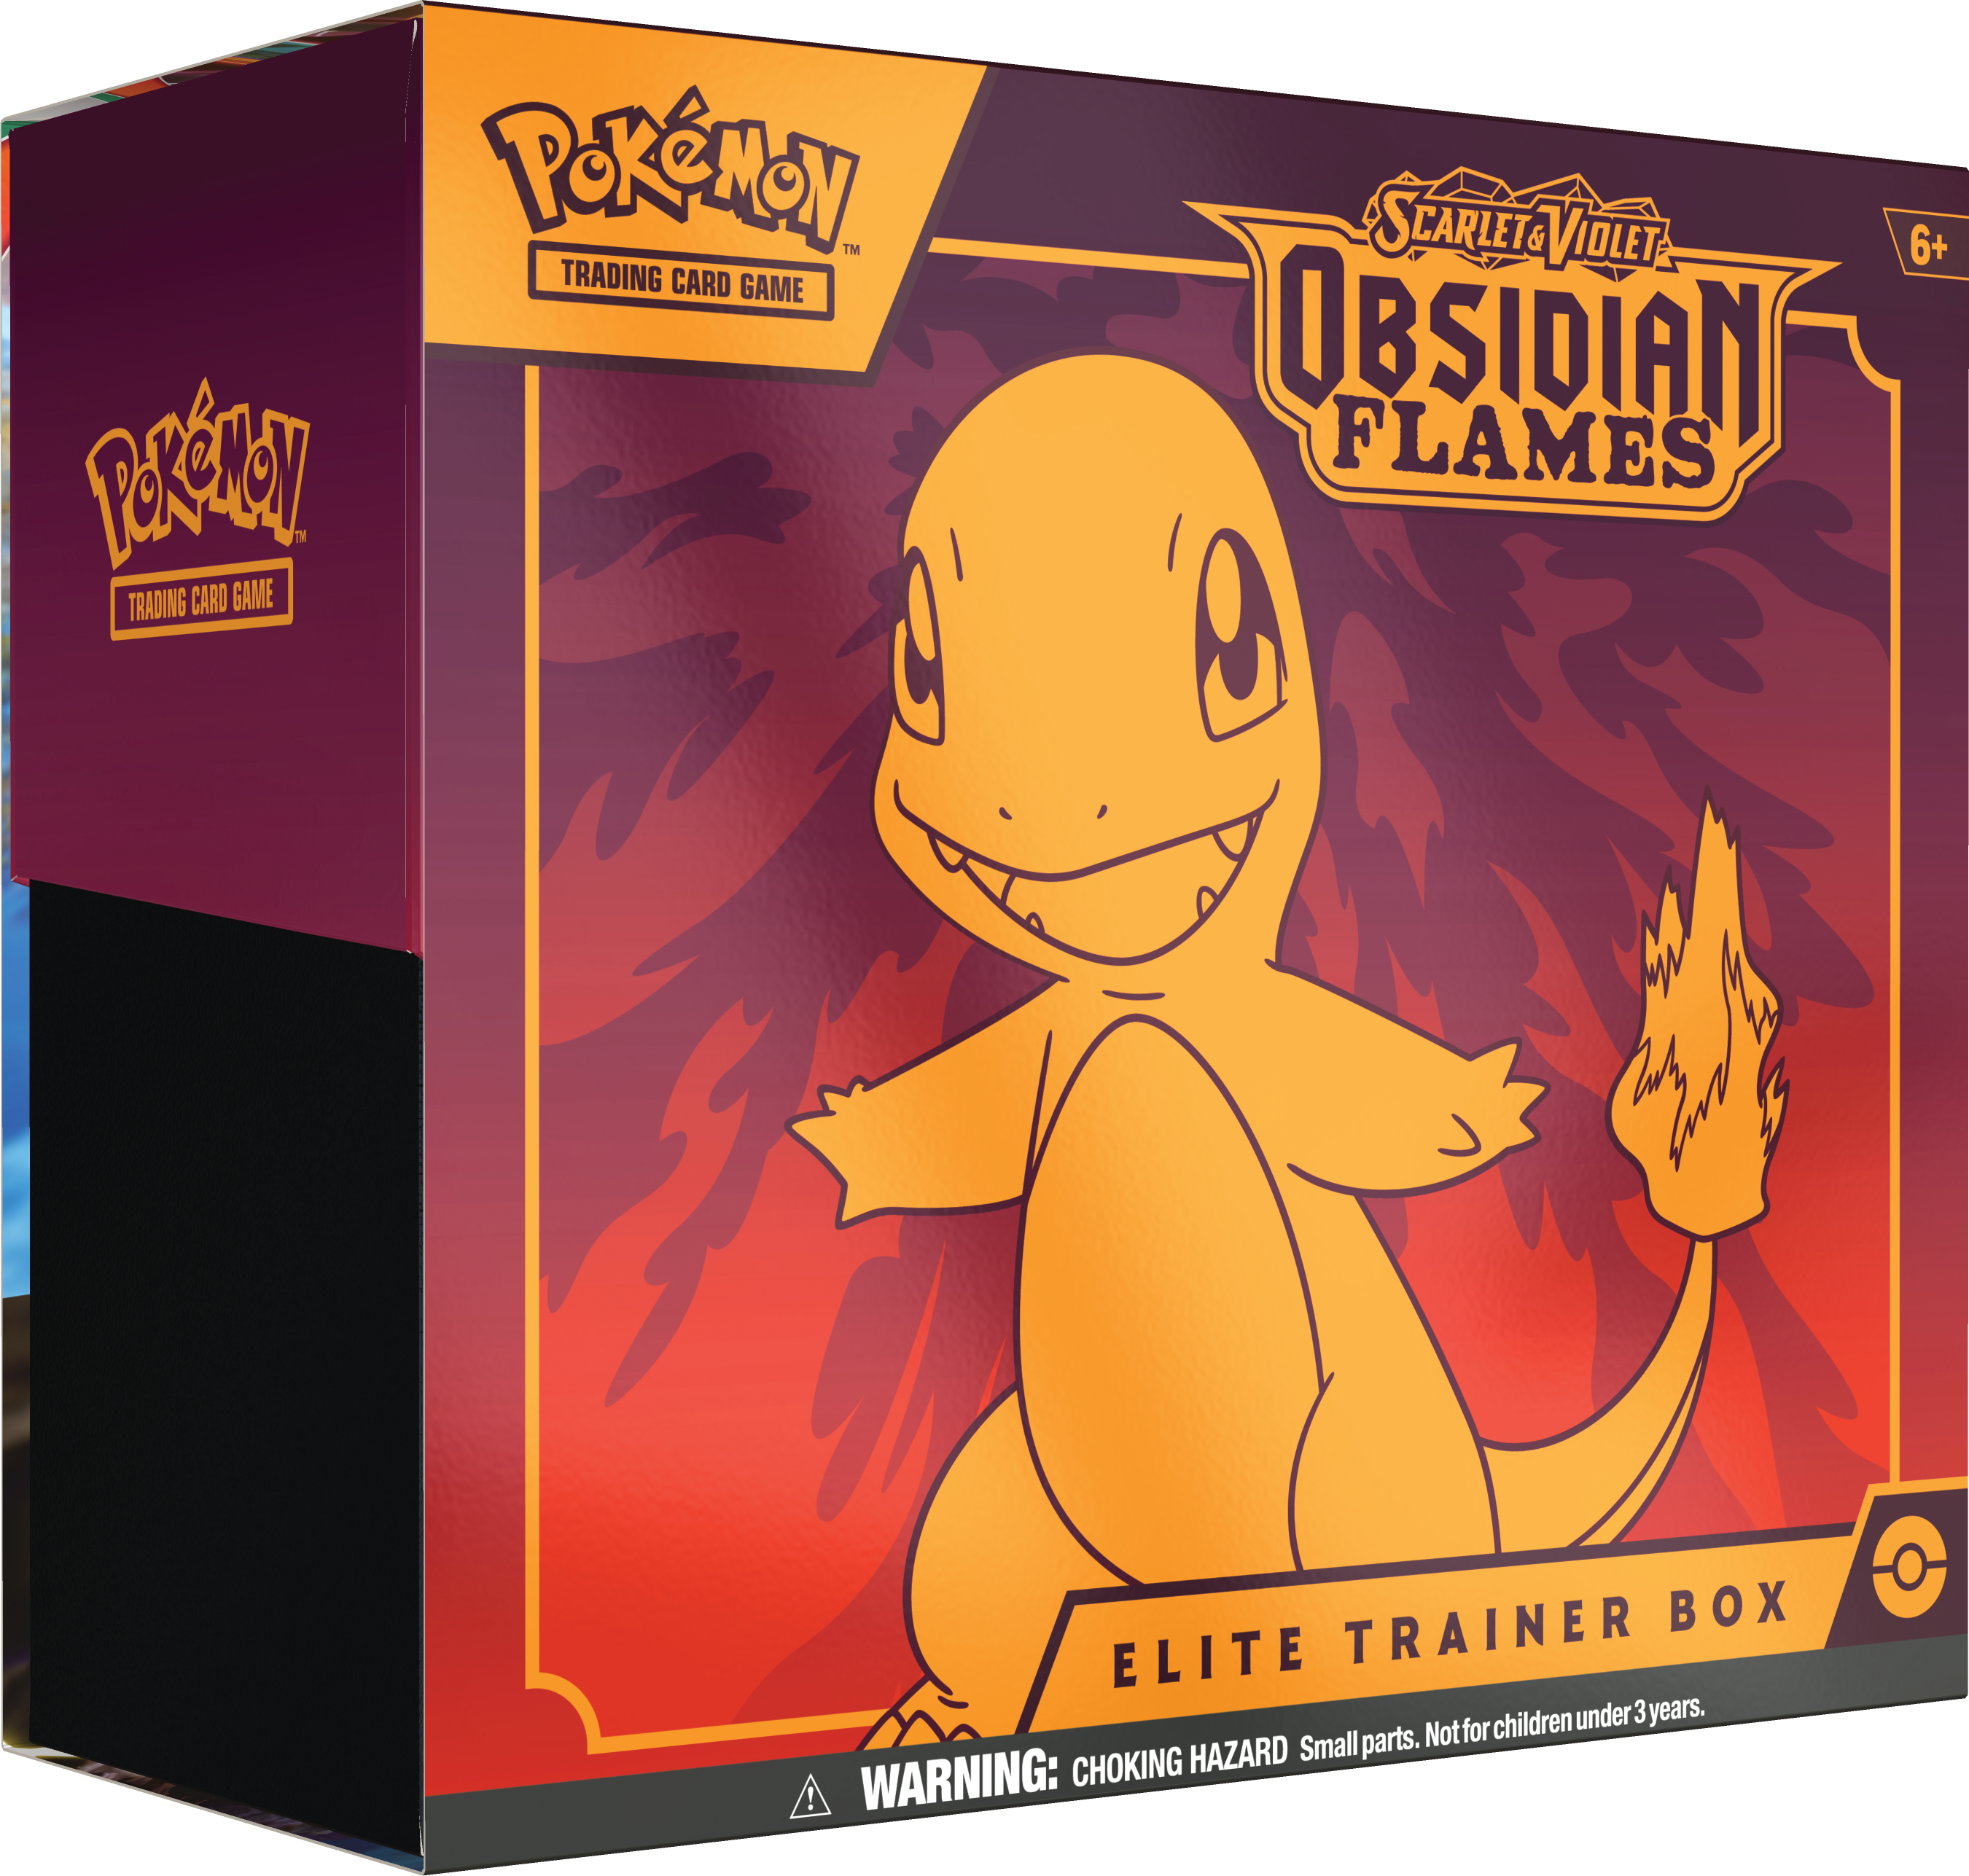 The Pokemon TCG Classic Contains The Charizard You've Always Wanted,  Pre-Orders Are Now Live